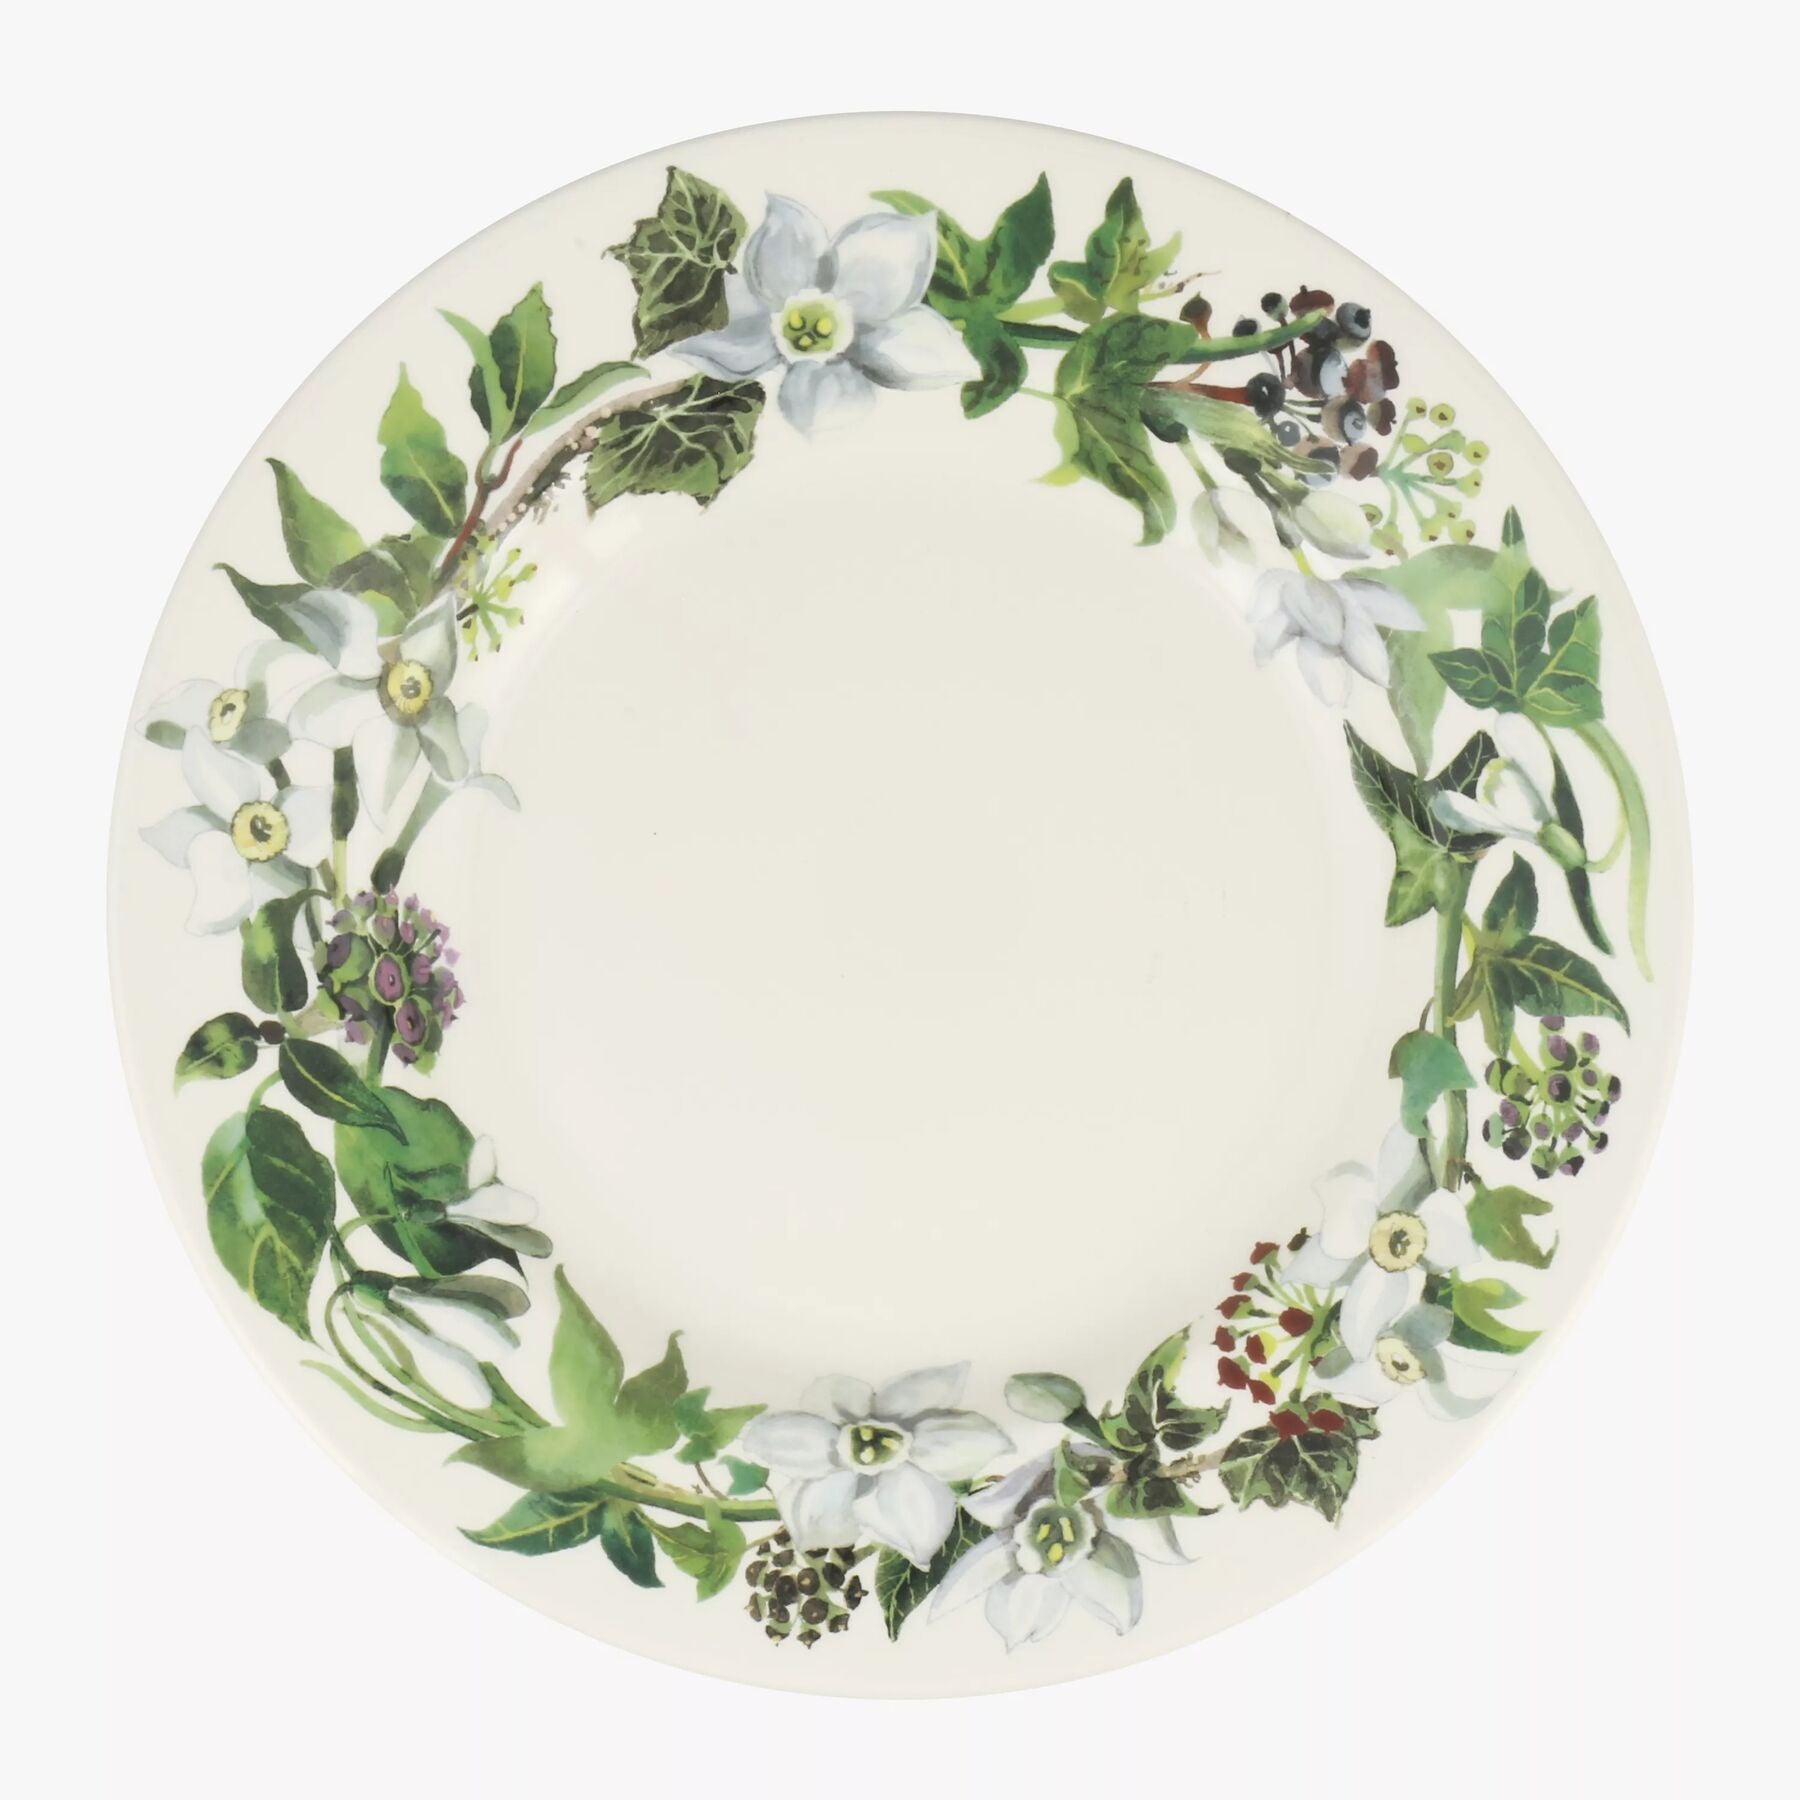 Ivy 10 1/2 Inch Plate - Unique Handmade & Handpainted English Earthenware British-Made Pottery Plate